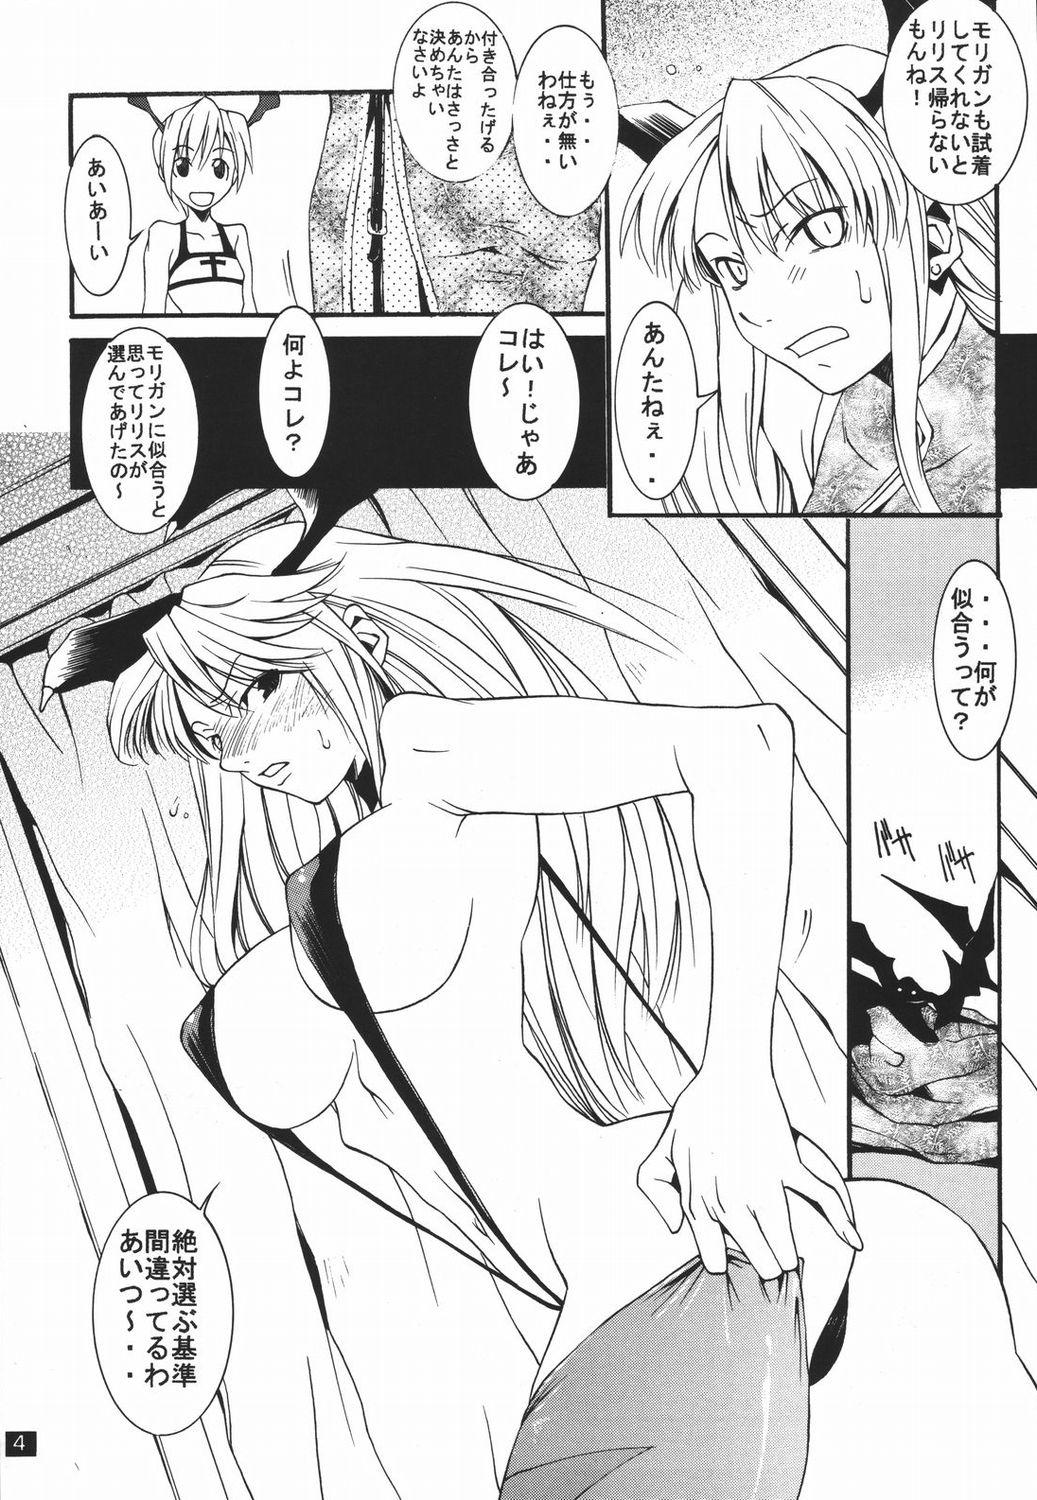 Perfect Pussy DREAM MACHINE summer special - Darkstalkers Colombia - Page 5